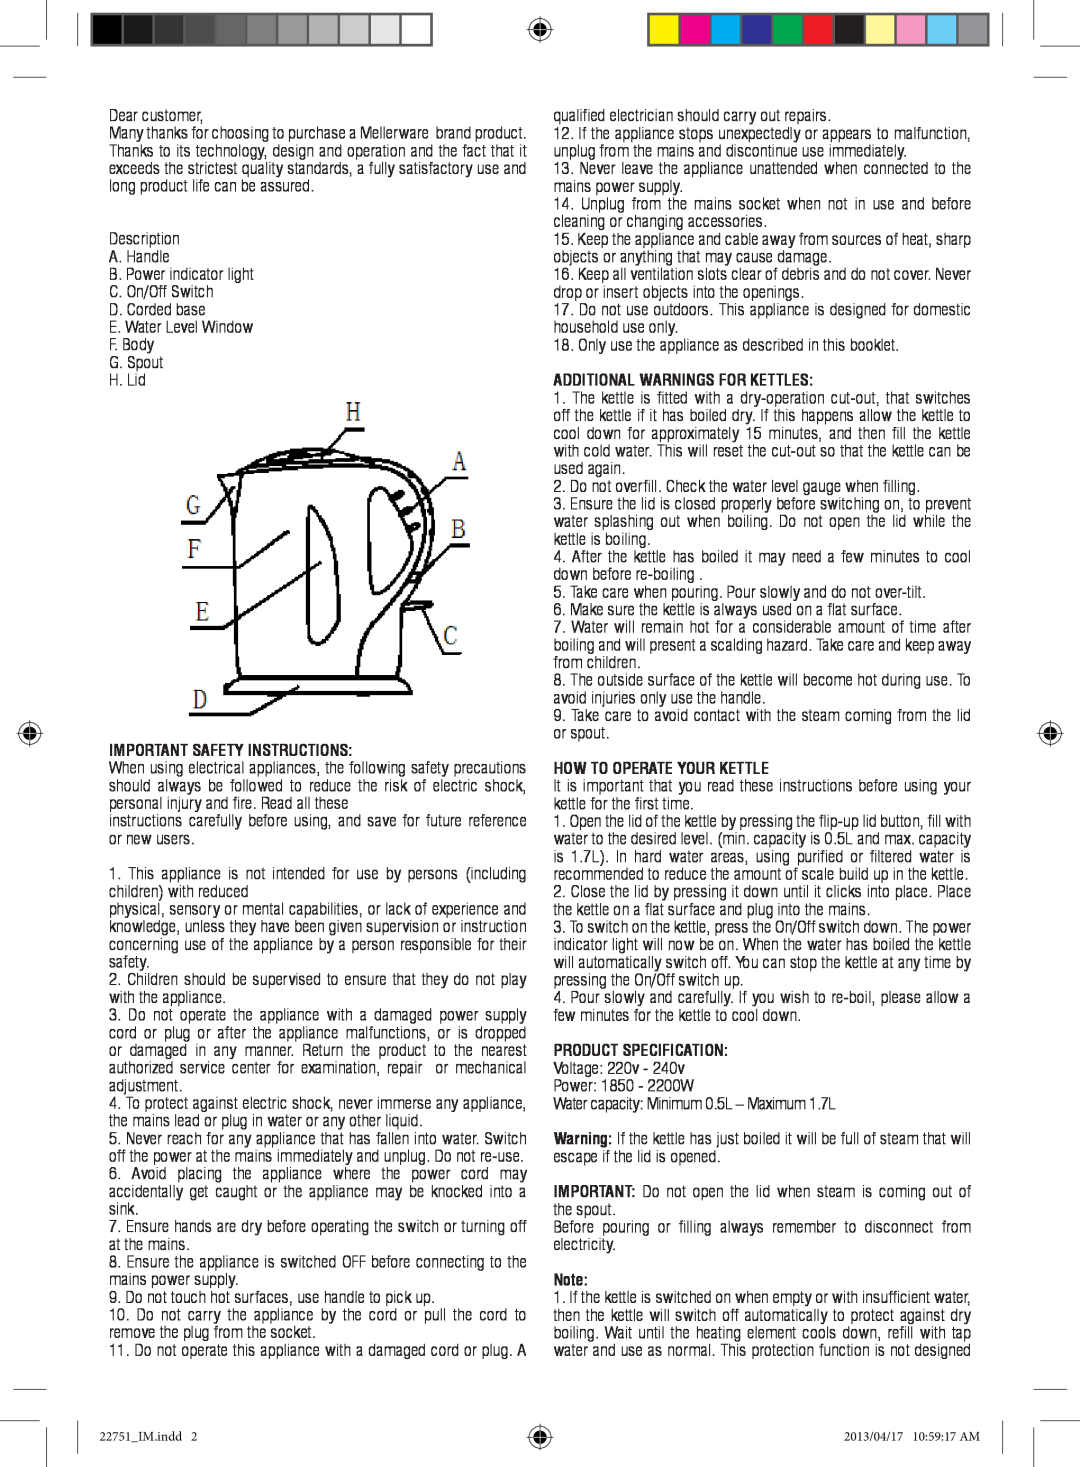 Mellerware 22751 manual Important Safety Instructions, Additional Warnings For Kettles, How To Operate Your Kettle 